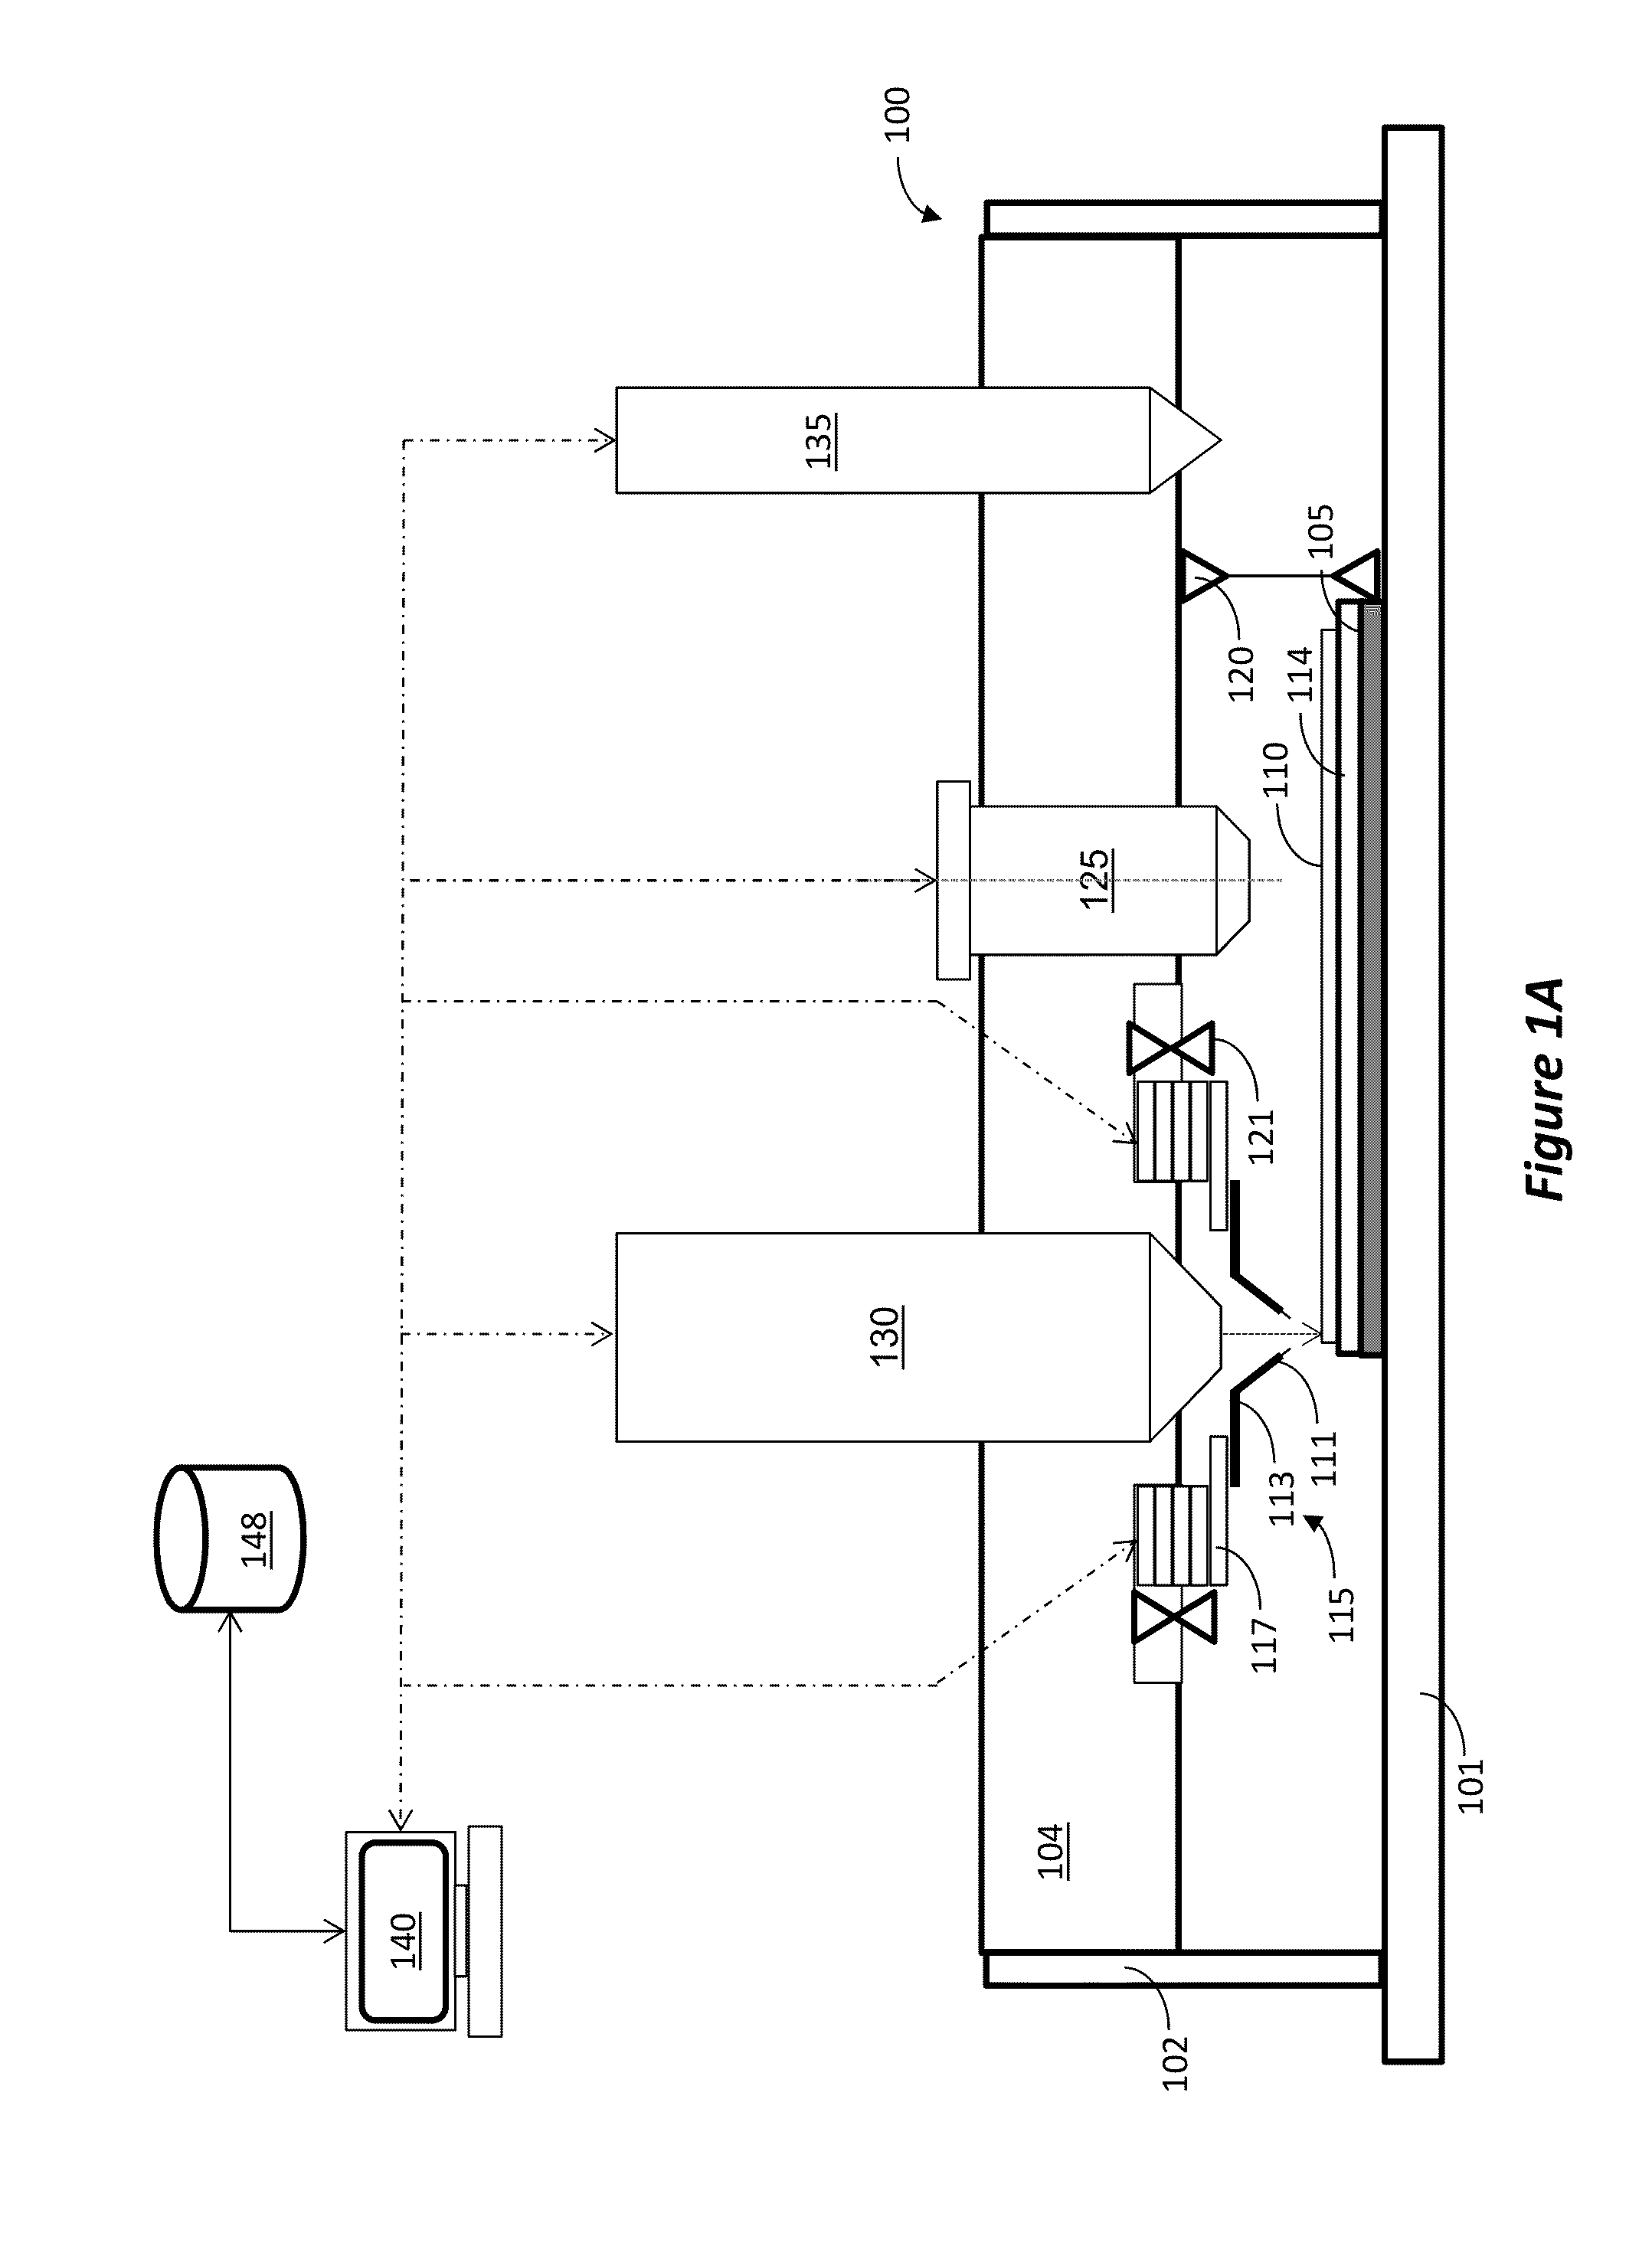 Through process flow intra-chip and inter-chip electrical analysis and process control using in-line nanoprobing